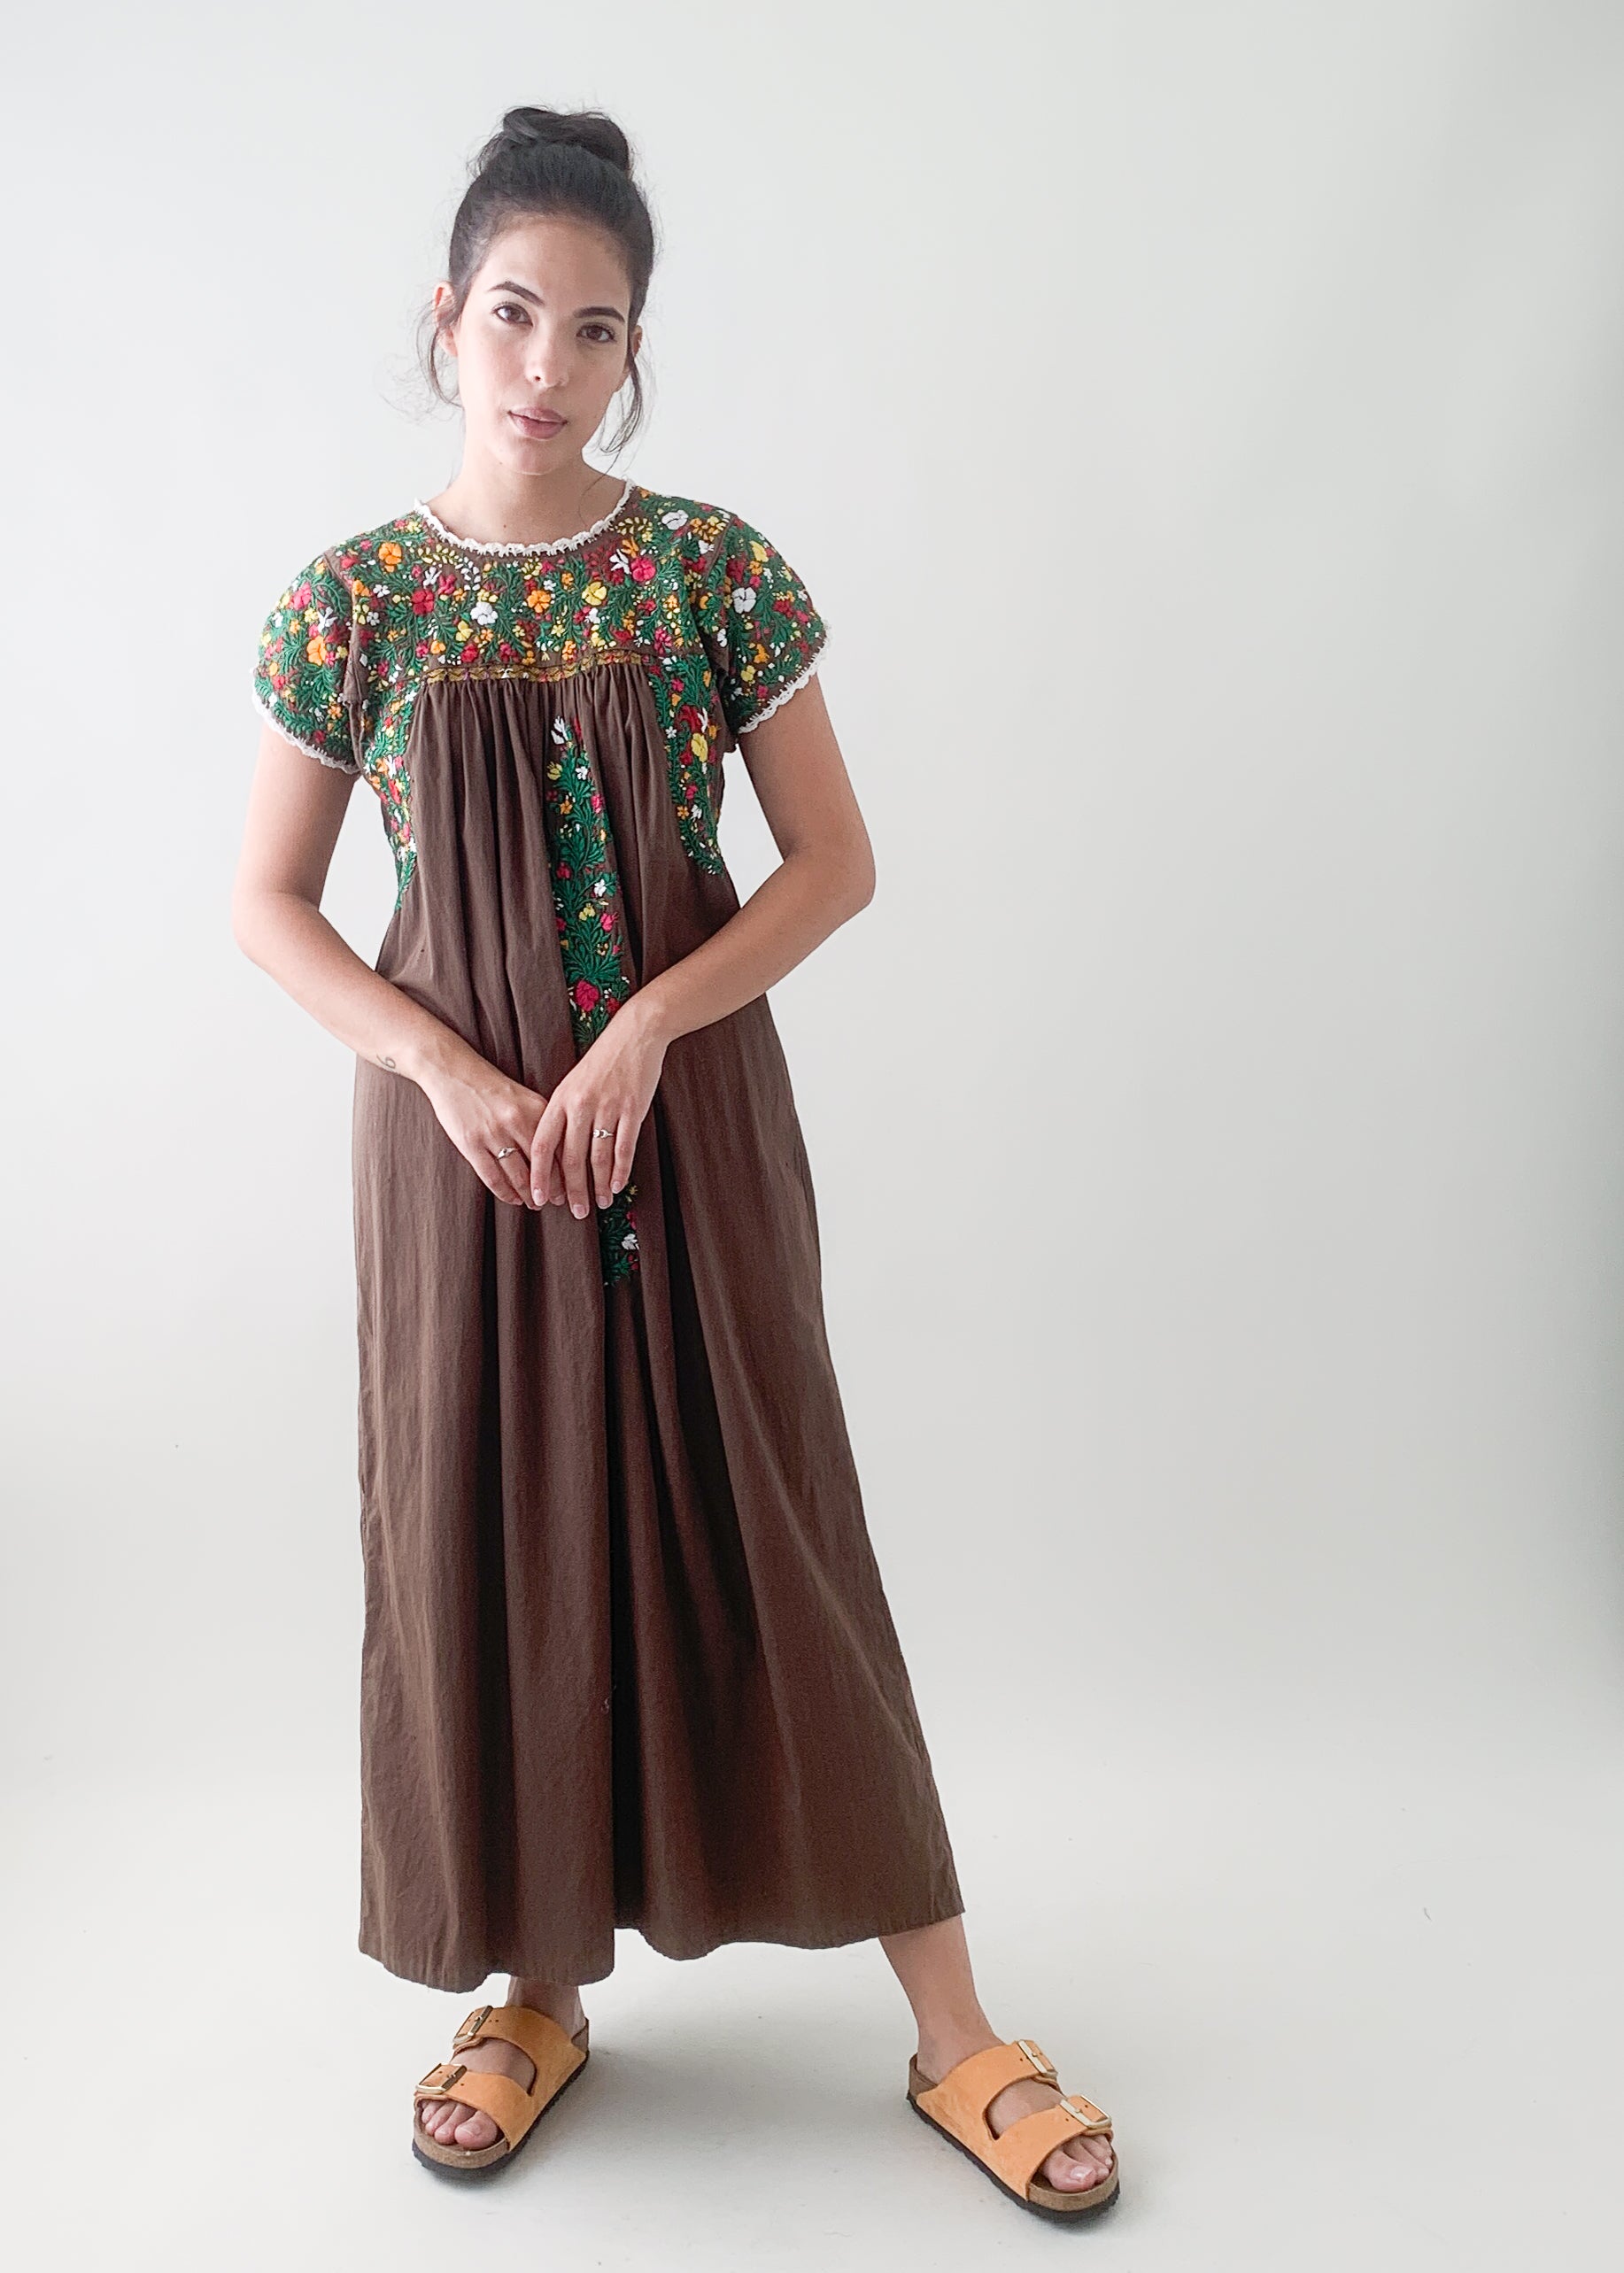 Vintage 1970s Mexican Embroidered Cotton Dress - Raleigh Vintage